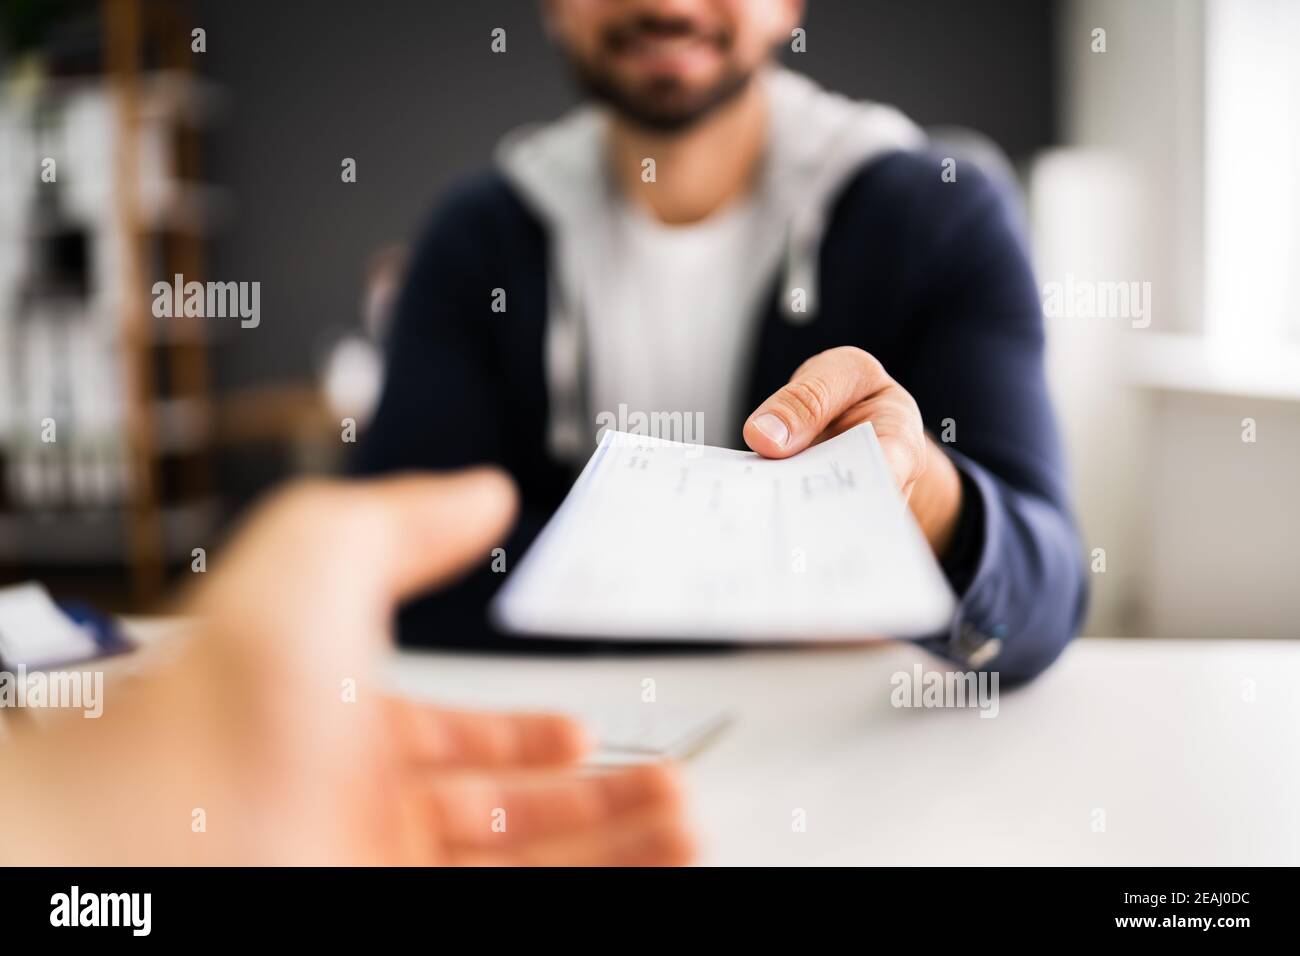 Man Giving Payroll Compensation Paycheck Stock Photo